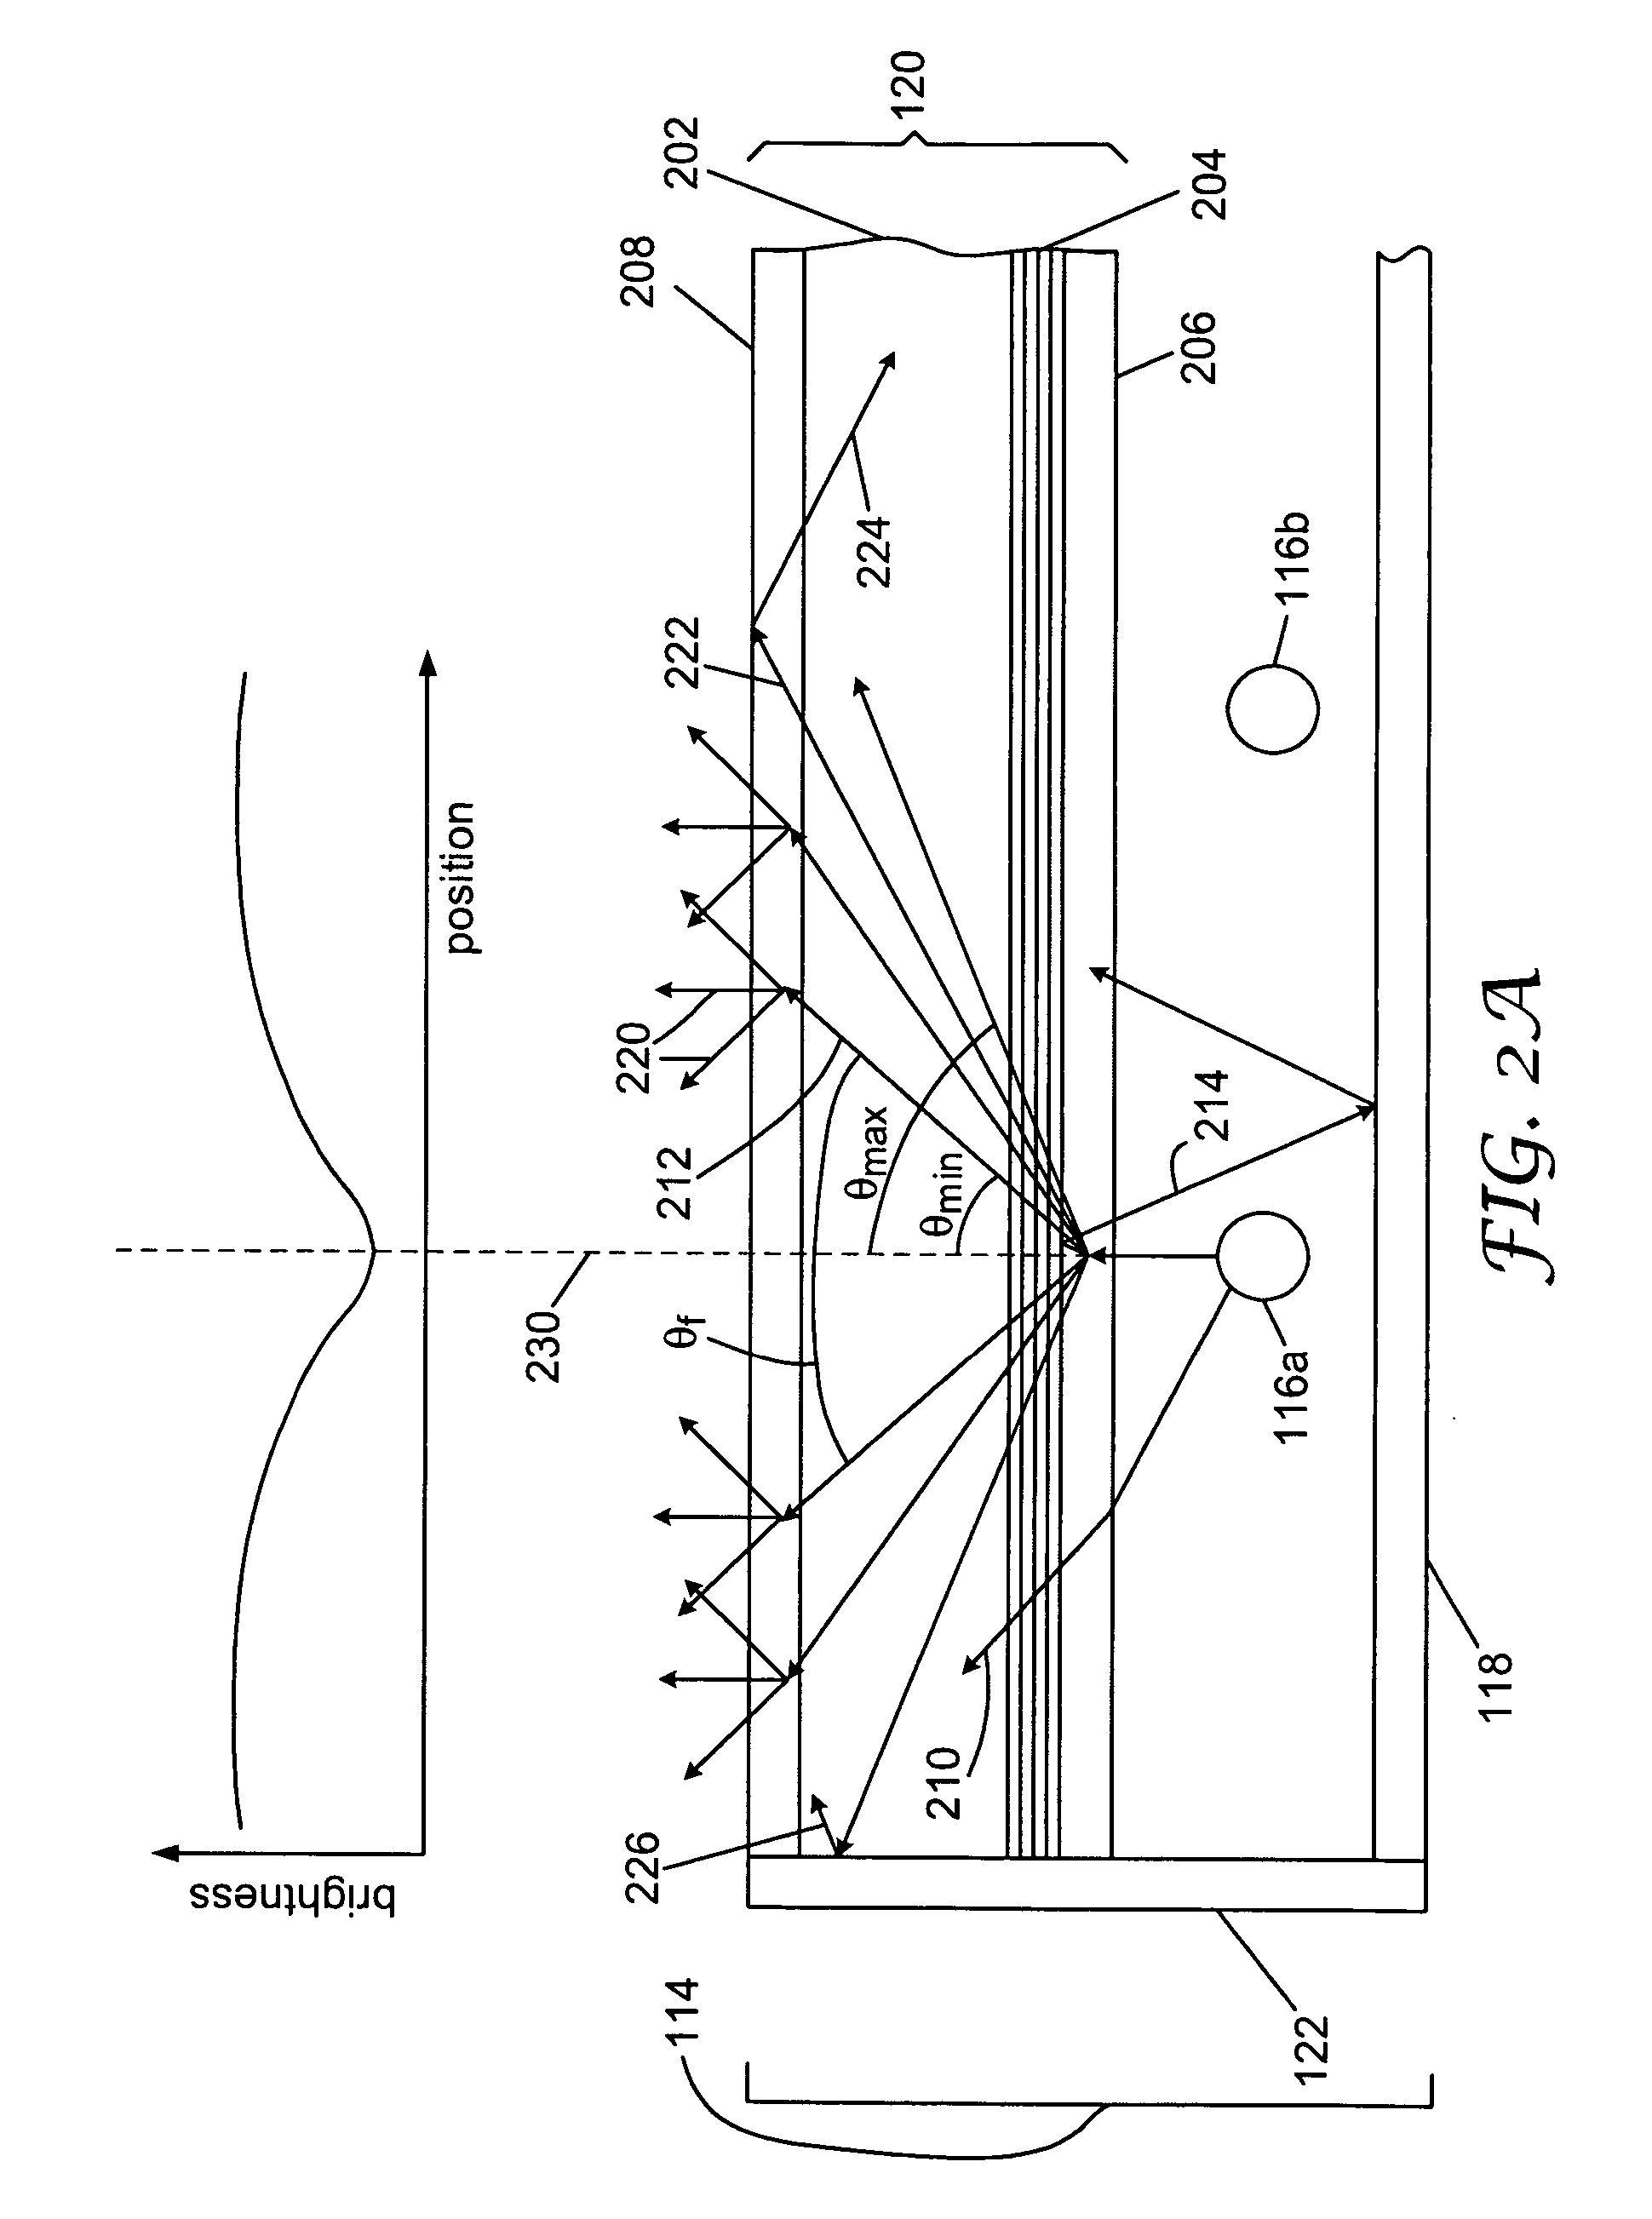 Optical element for lateral light spreading in back-lit displays and system using same